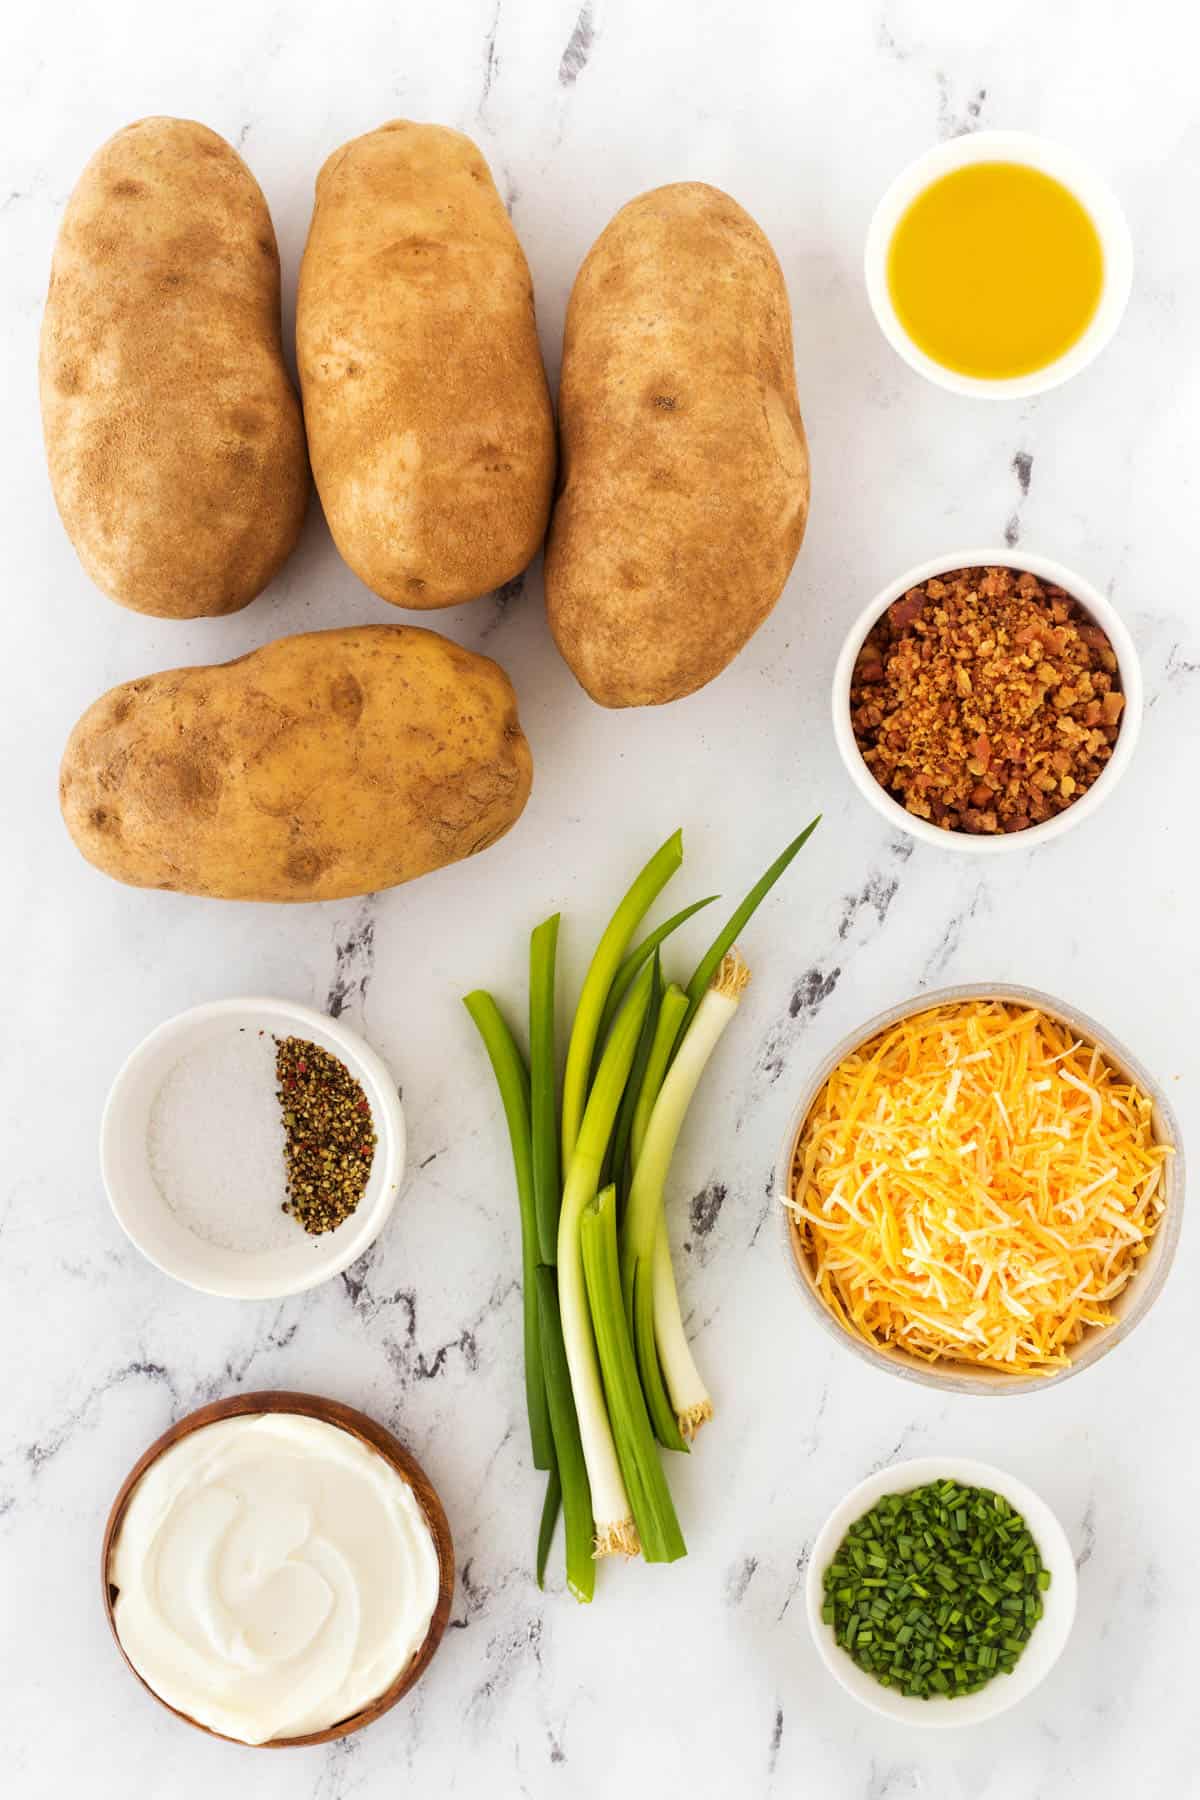 Ingredients for Fluffy Crock Pot Baked Potatoes.